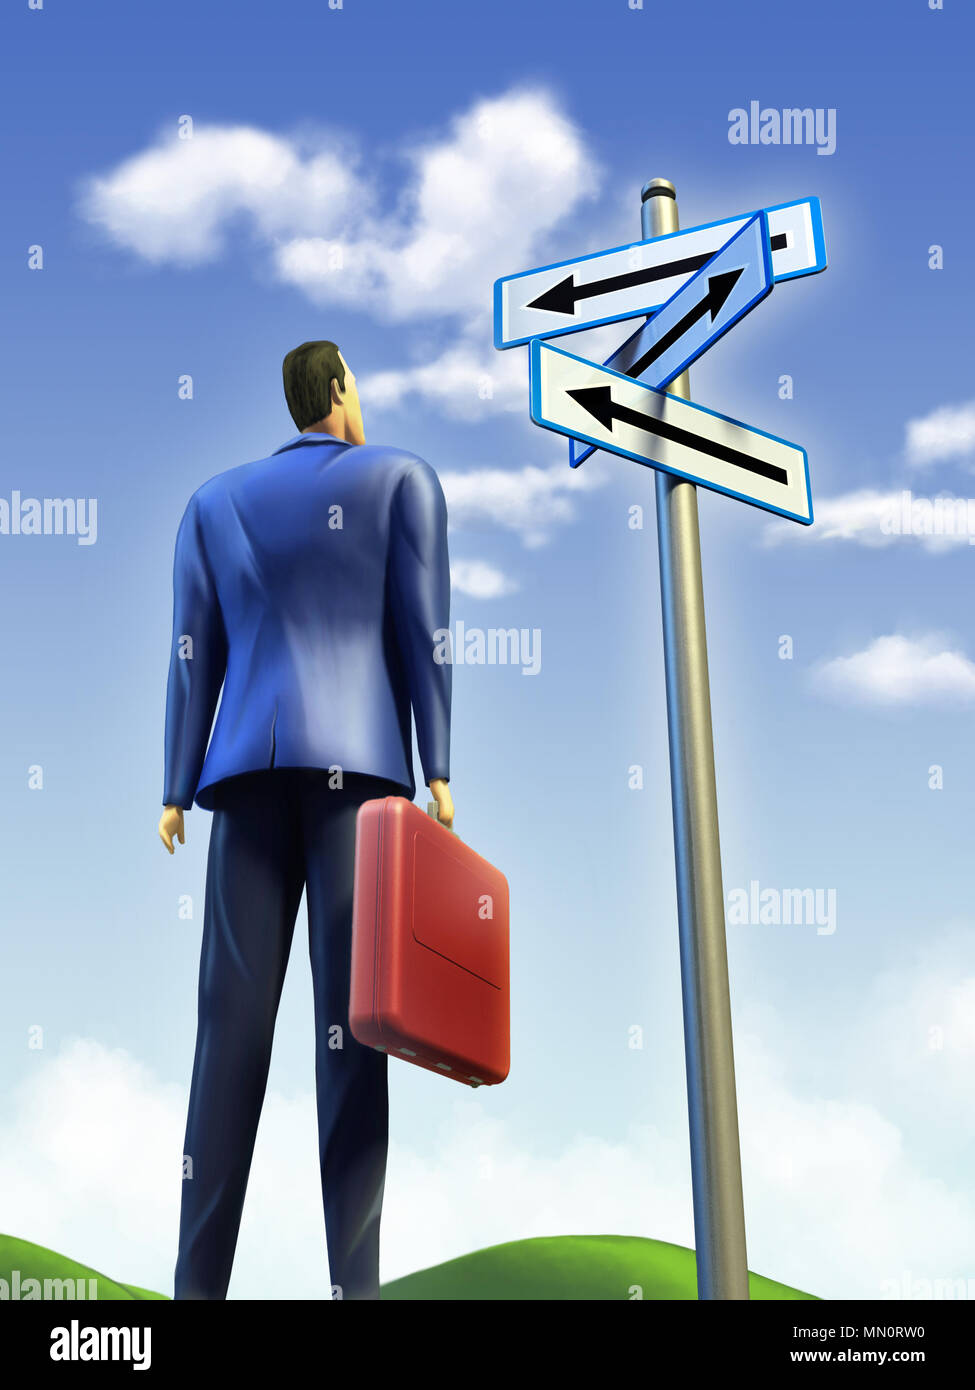 Businessman standing at a crossroad. A signpost points at multiple directions. Digital illustration. Stock Photo